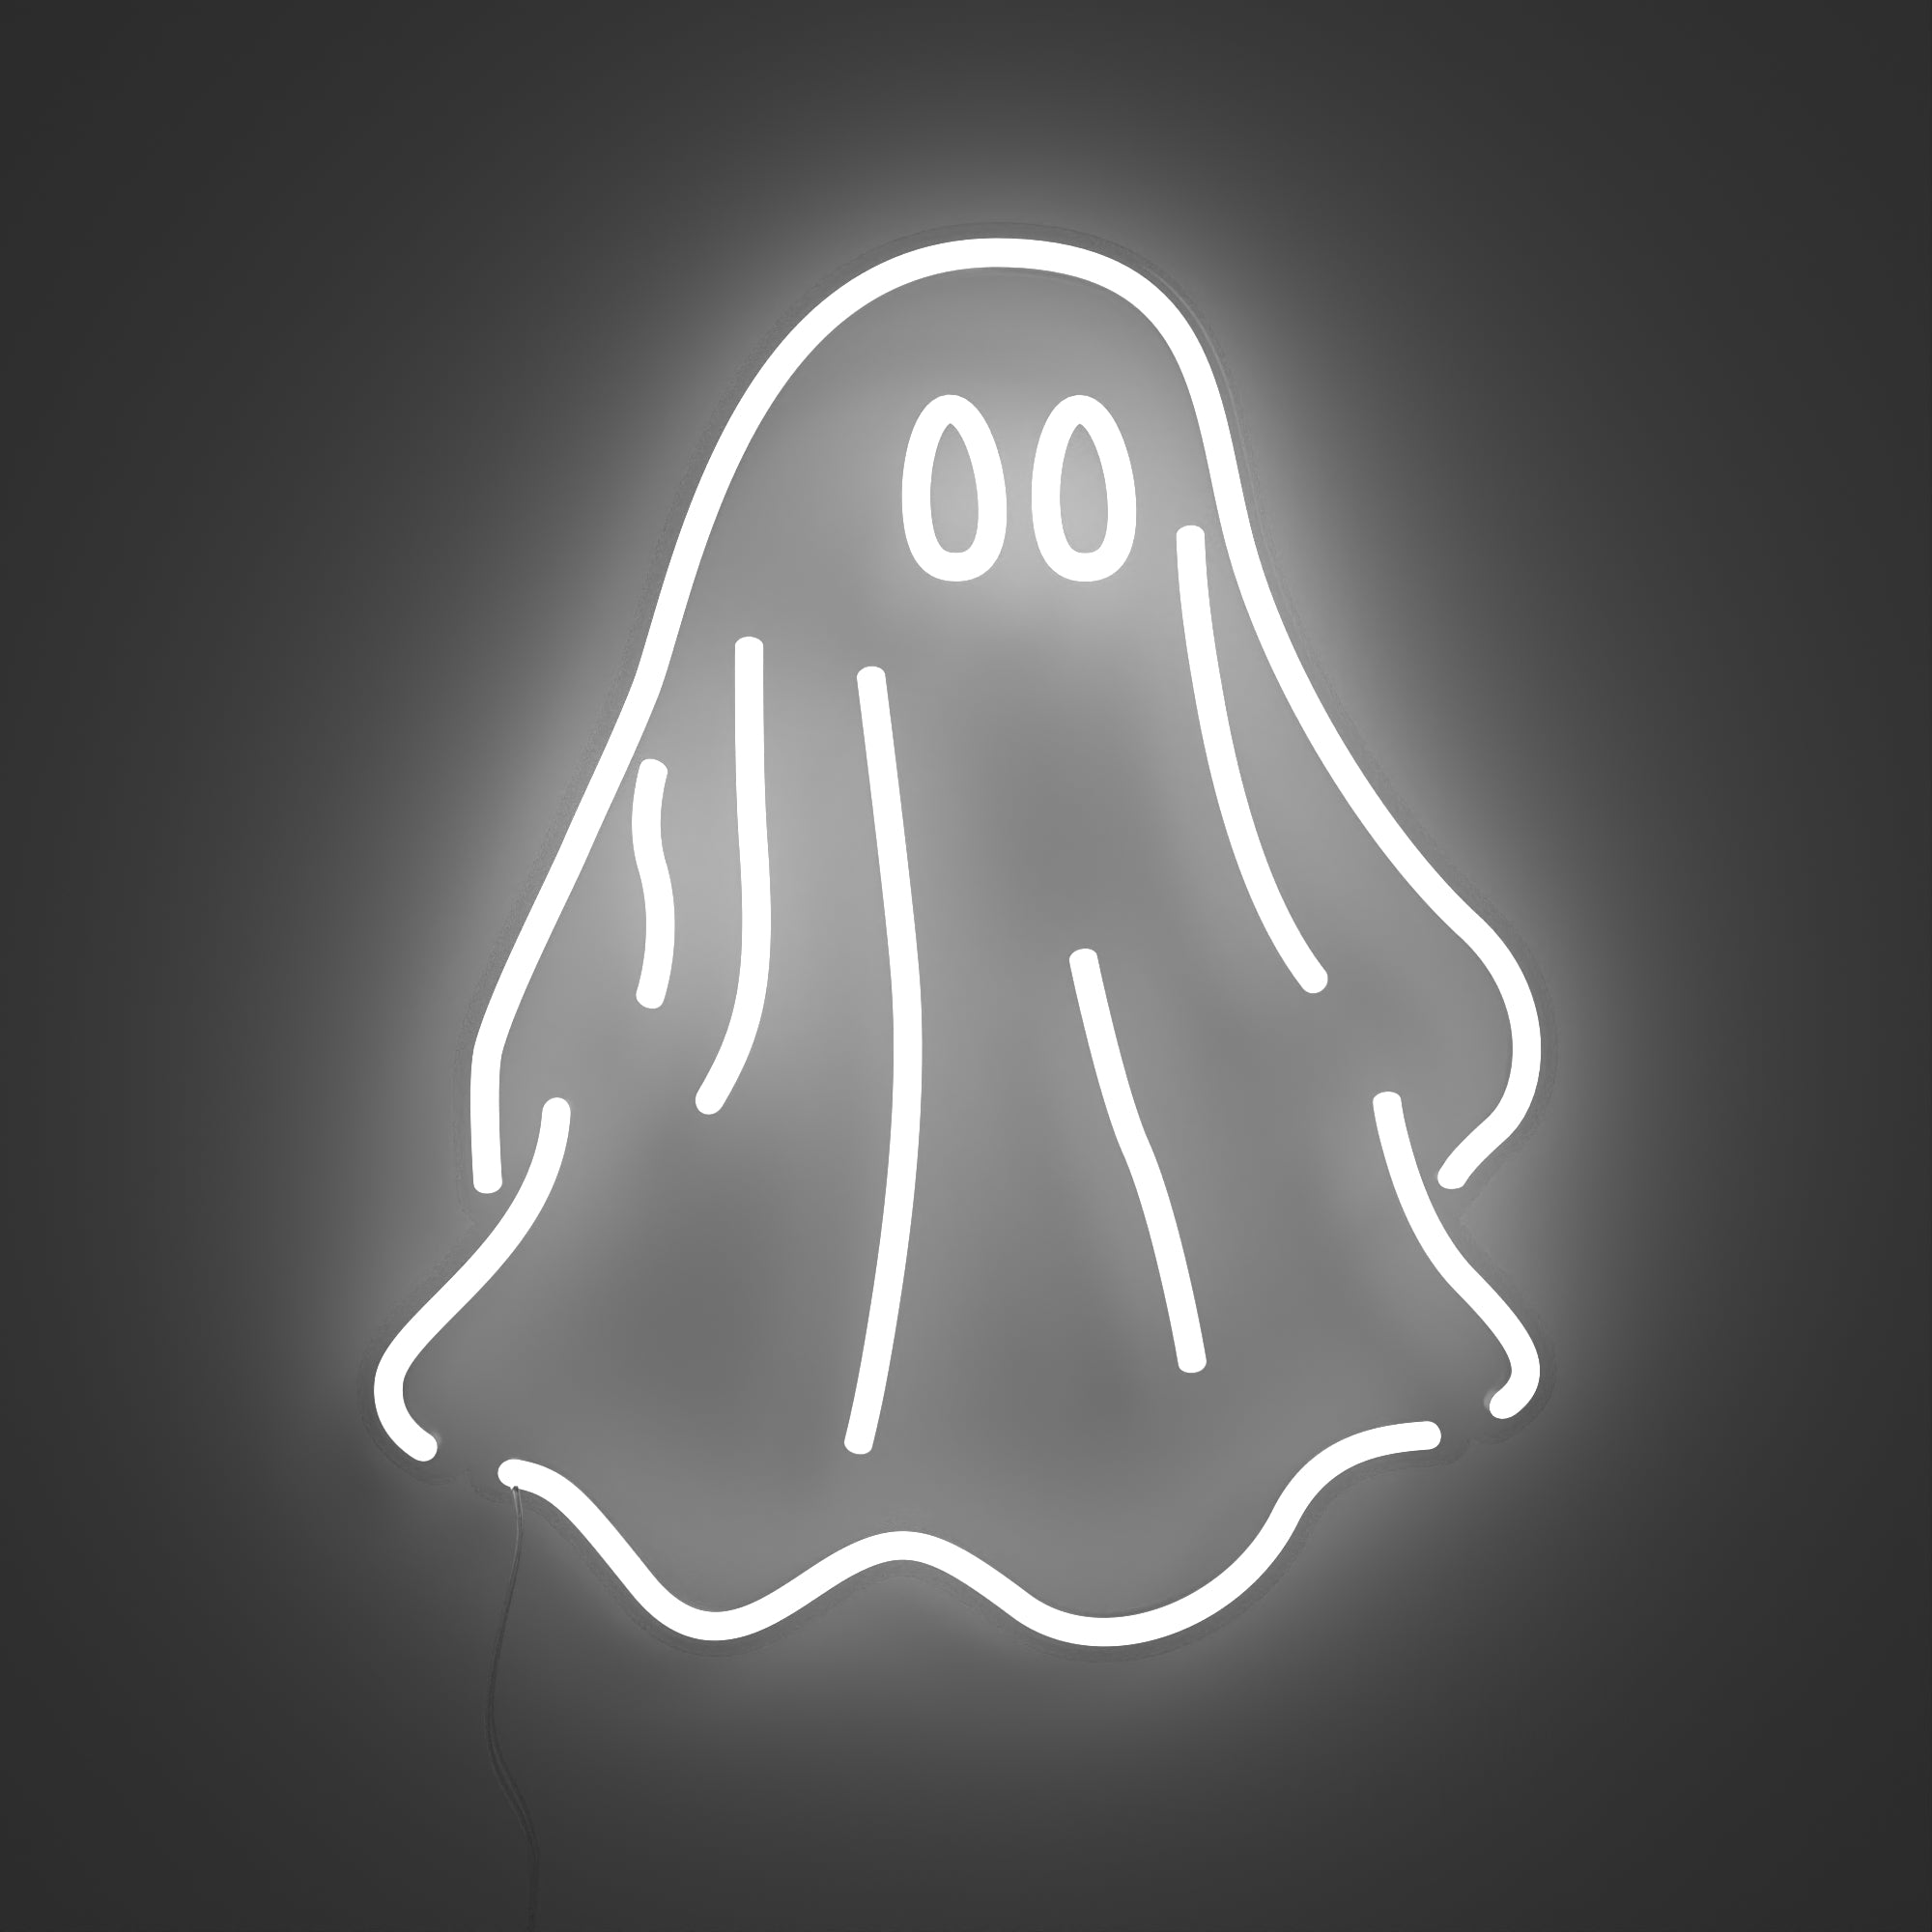 Sheet Ghost neon sign